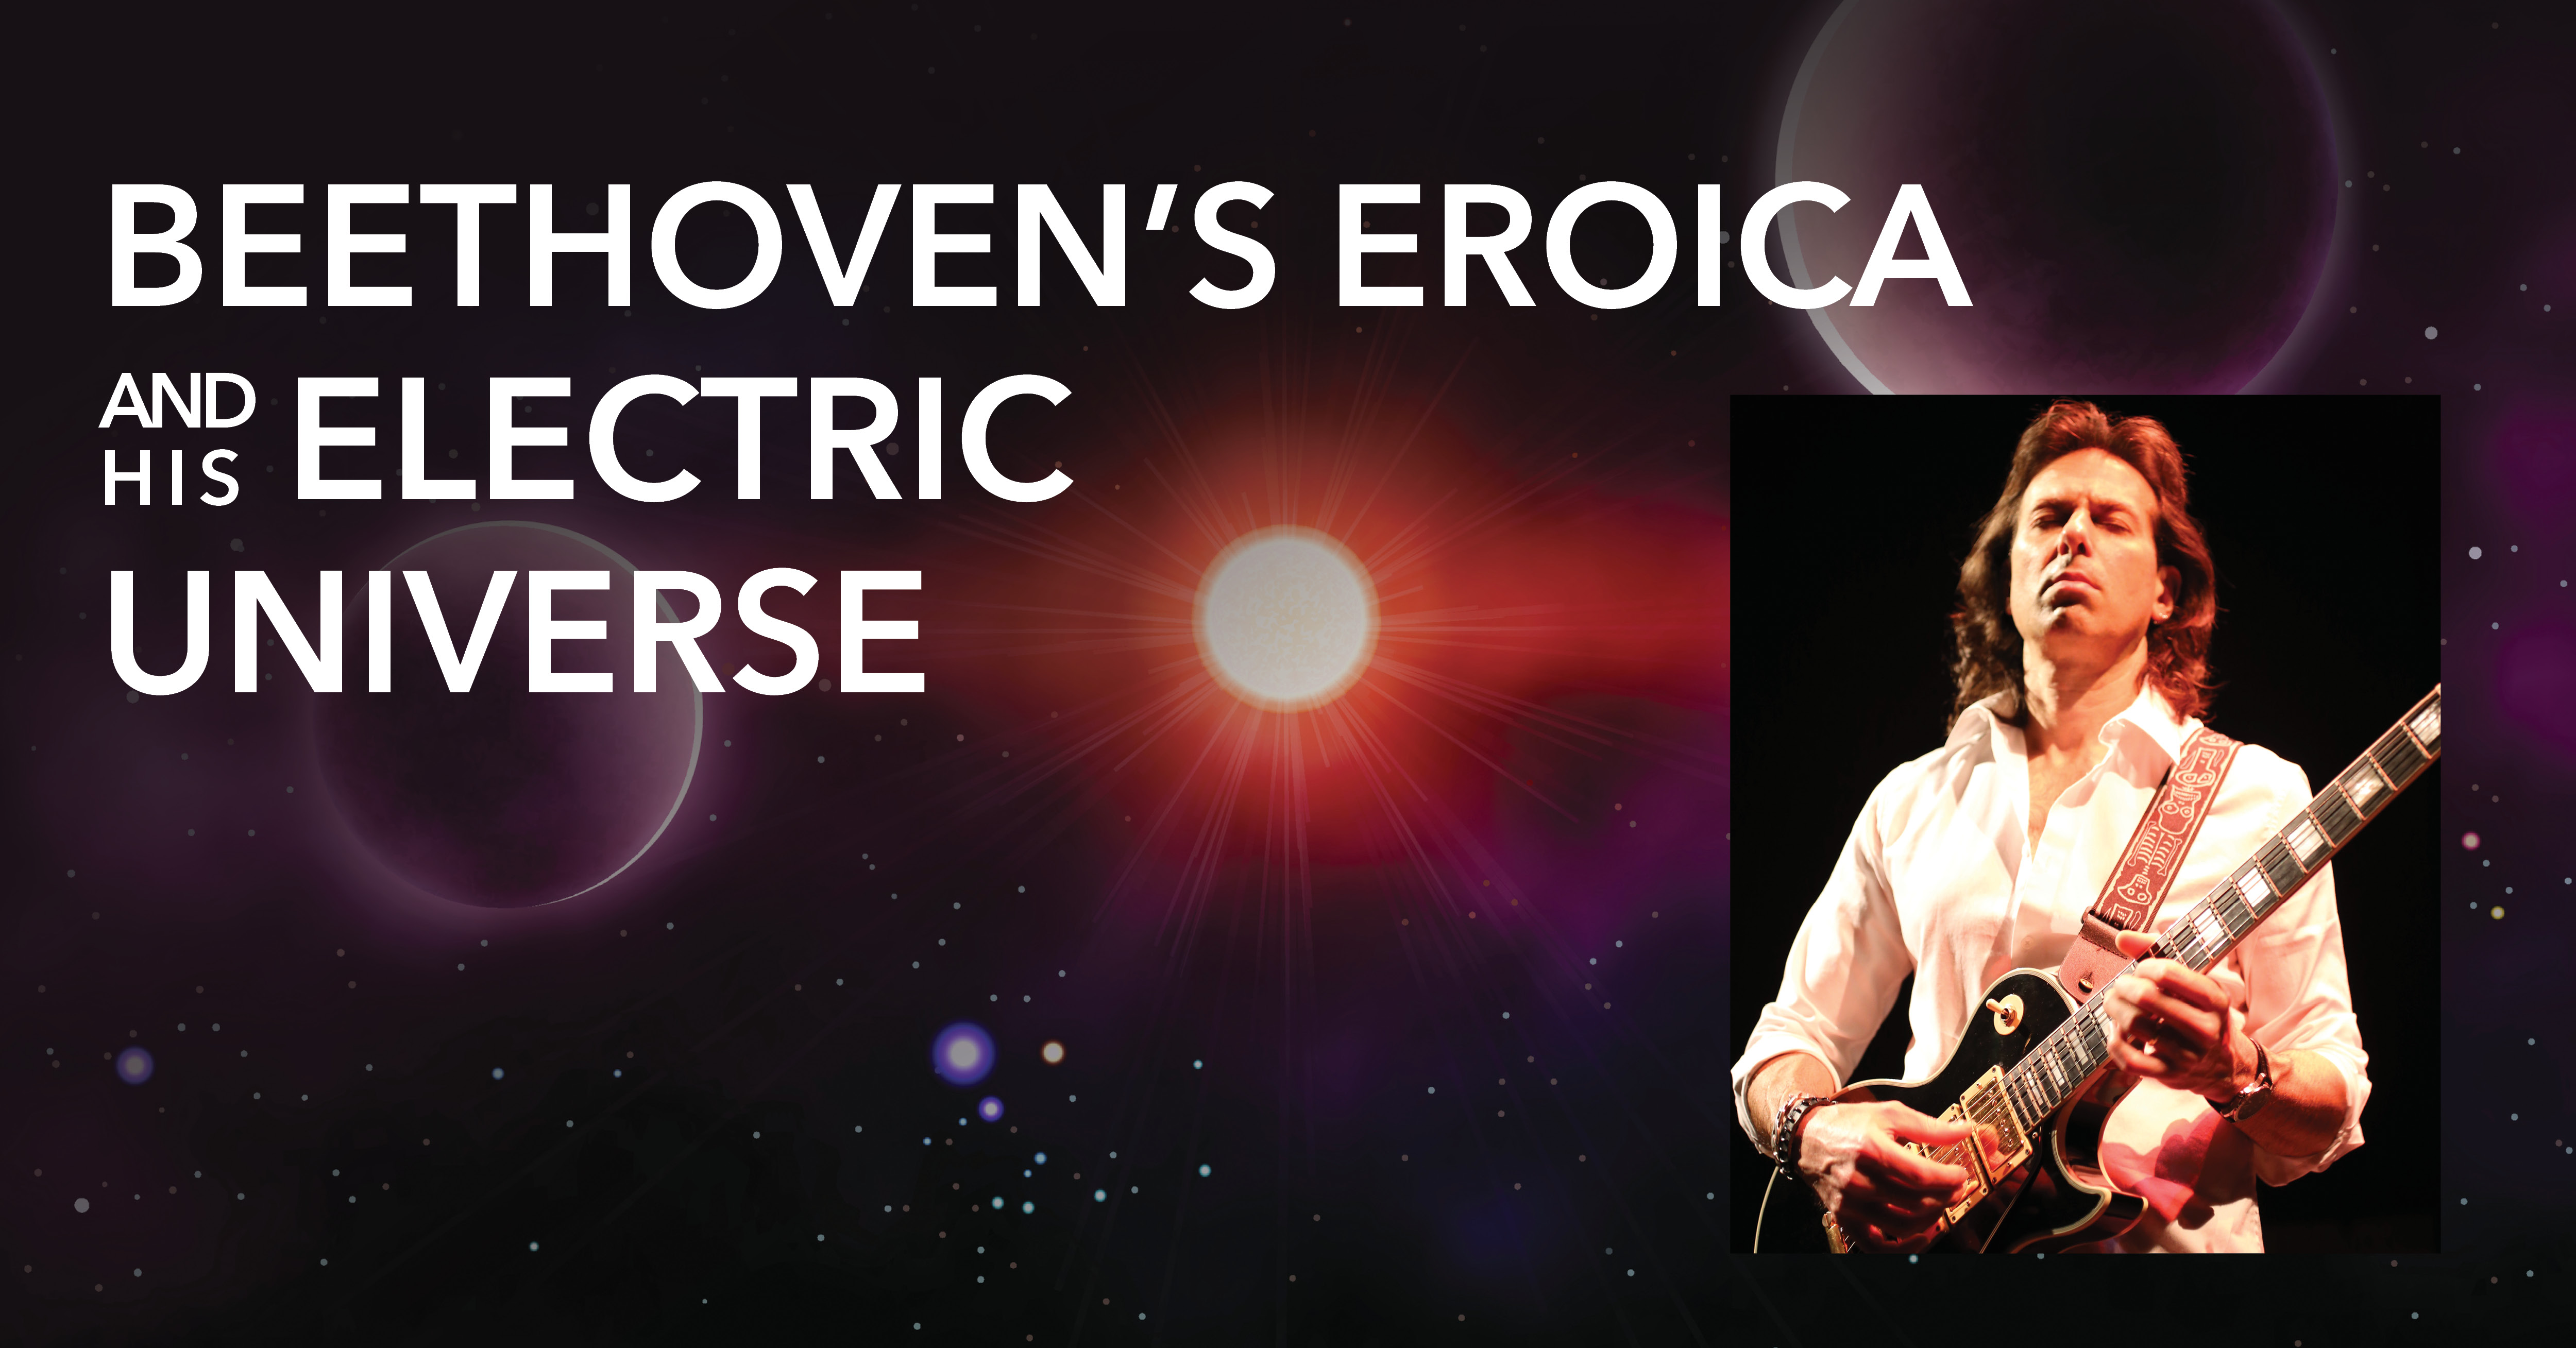 Beethoven’s Eroica and His Electric Universe